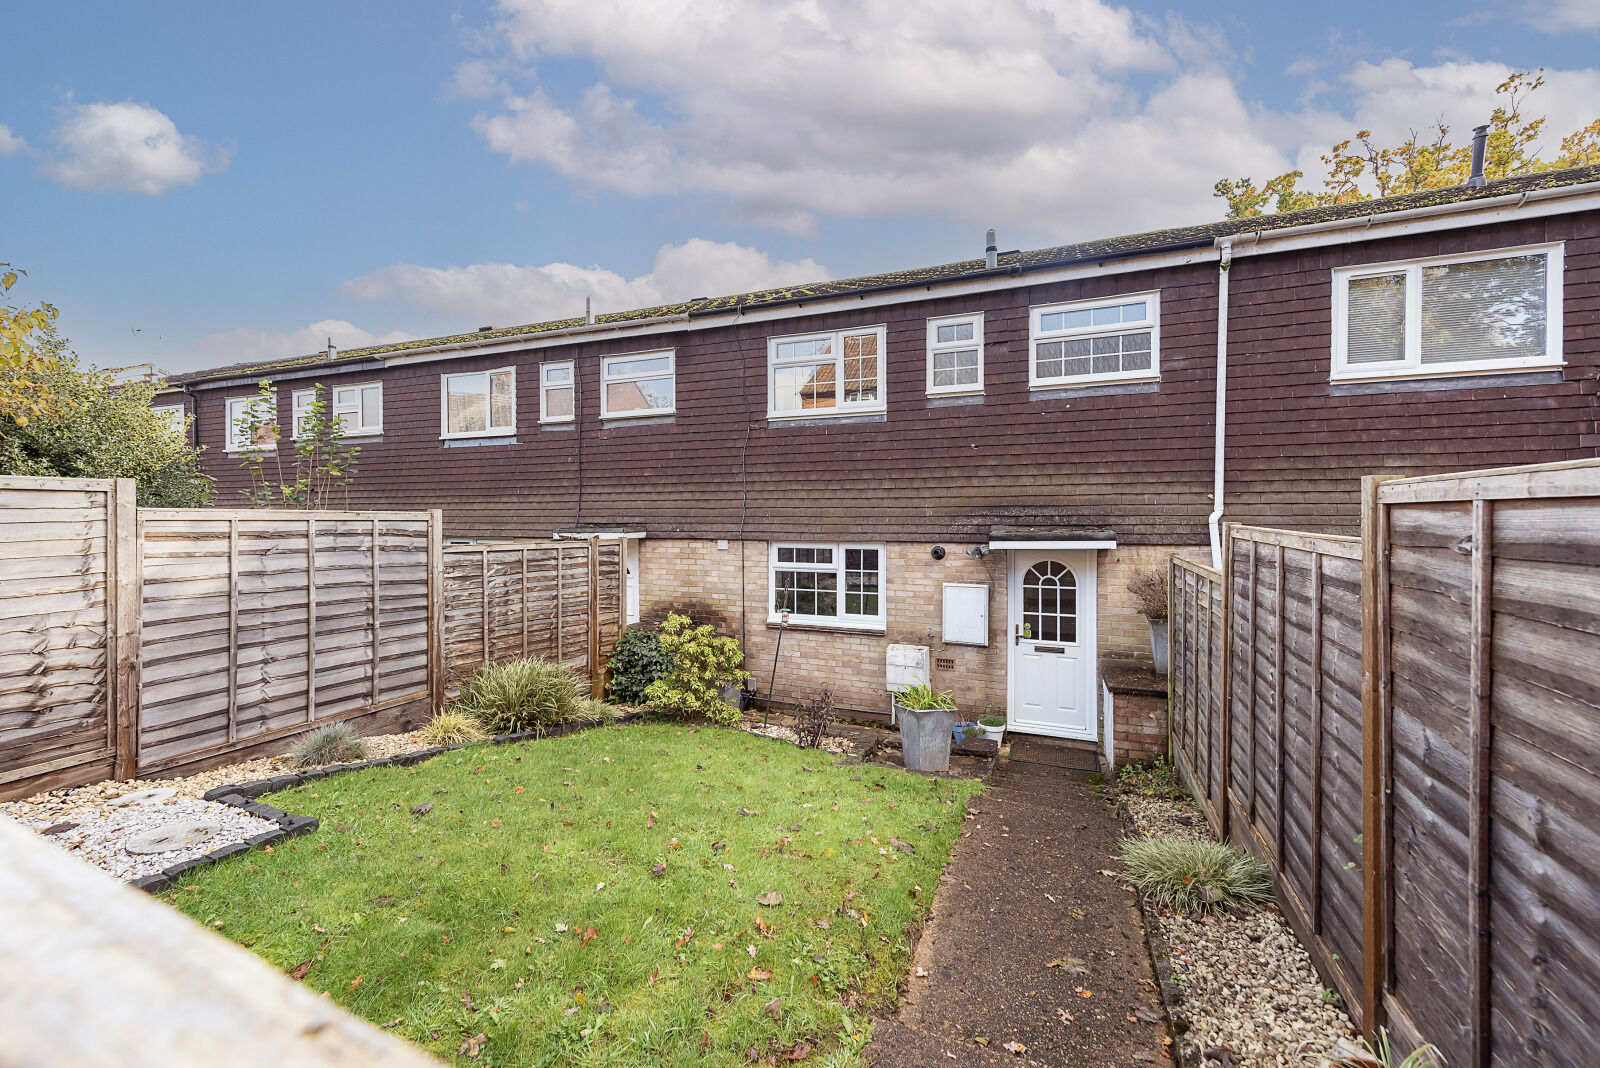 3 bedroom mid terraced house for sale Martyr Close, St. Albans, AL1, main image